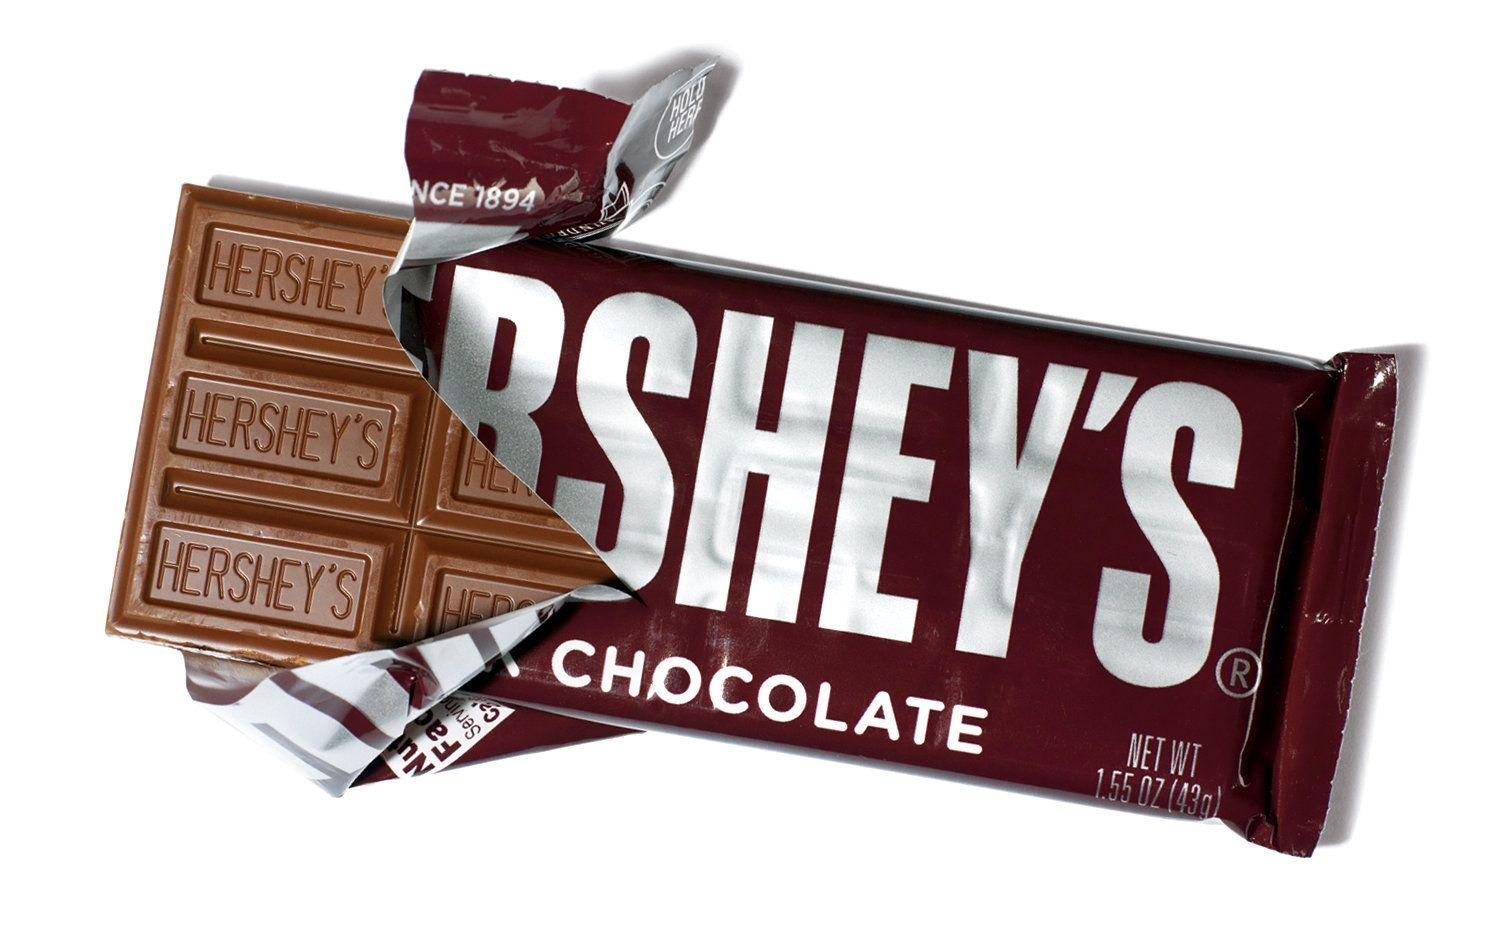 A Hershey’s Milk Chocolate bar contains mg of caffeine per serving